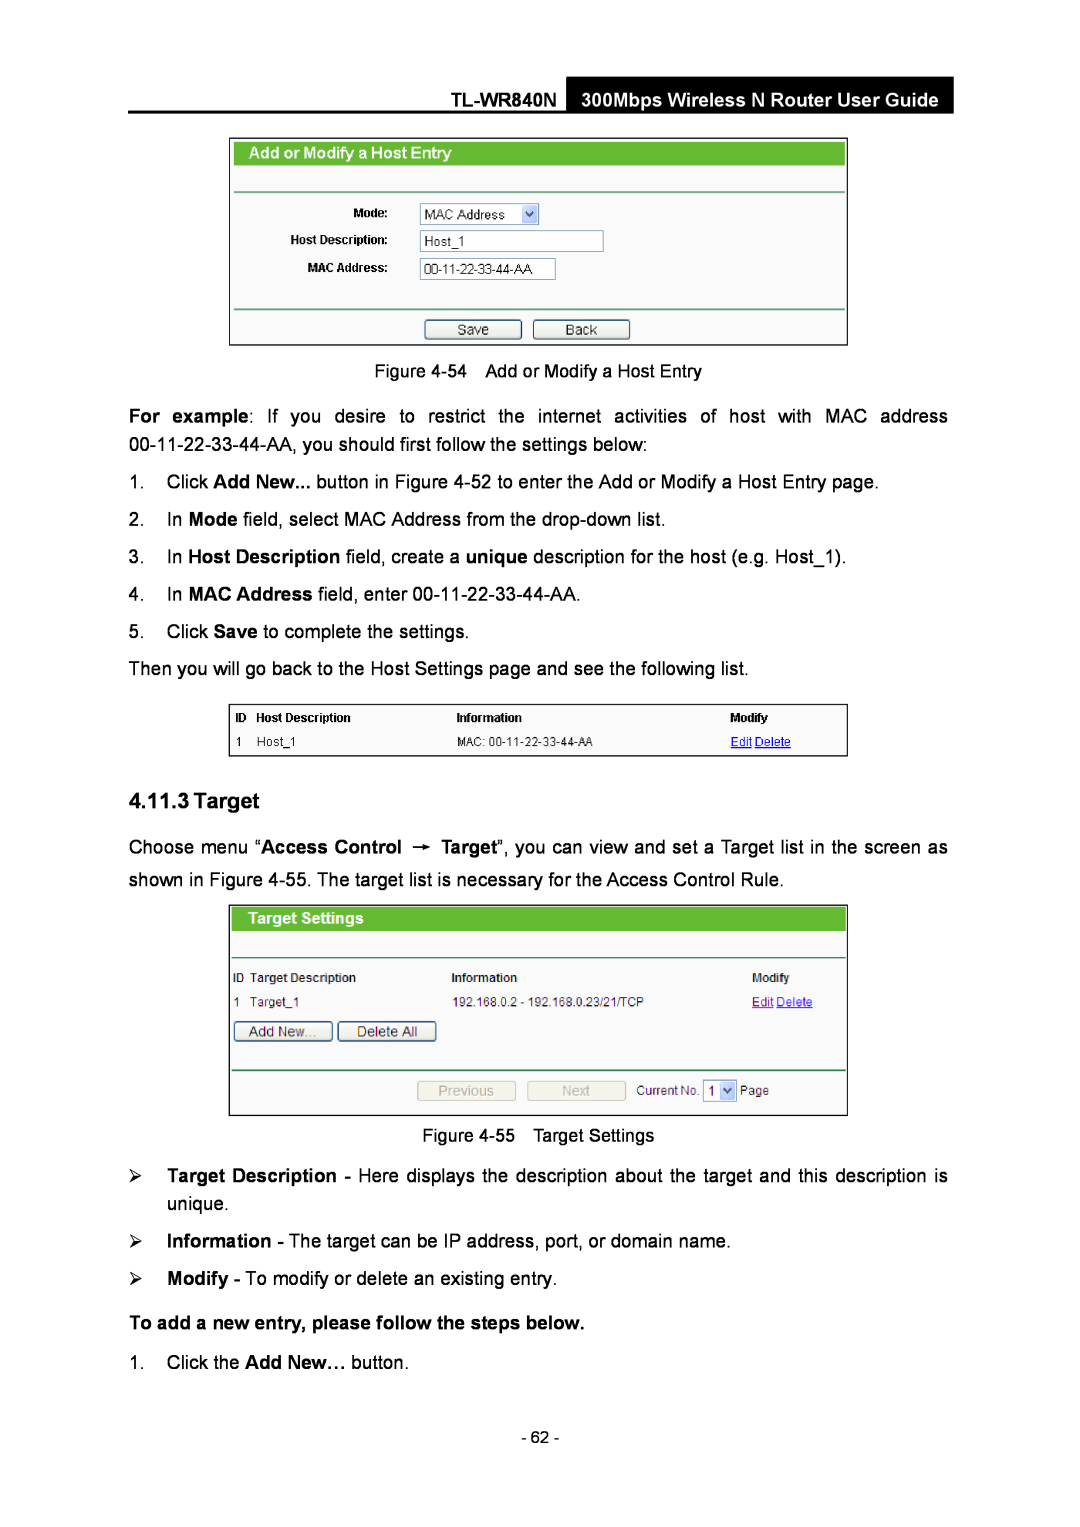 TP-Link manual Target, TL-WR840N 300Mbps Wireless N Router User Guide, To add a new entry, please follow the steps below 